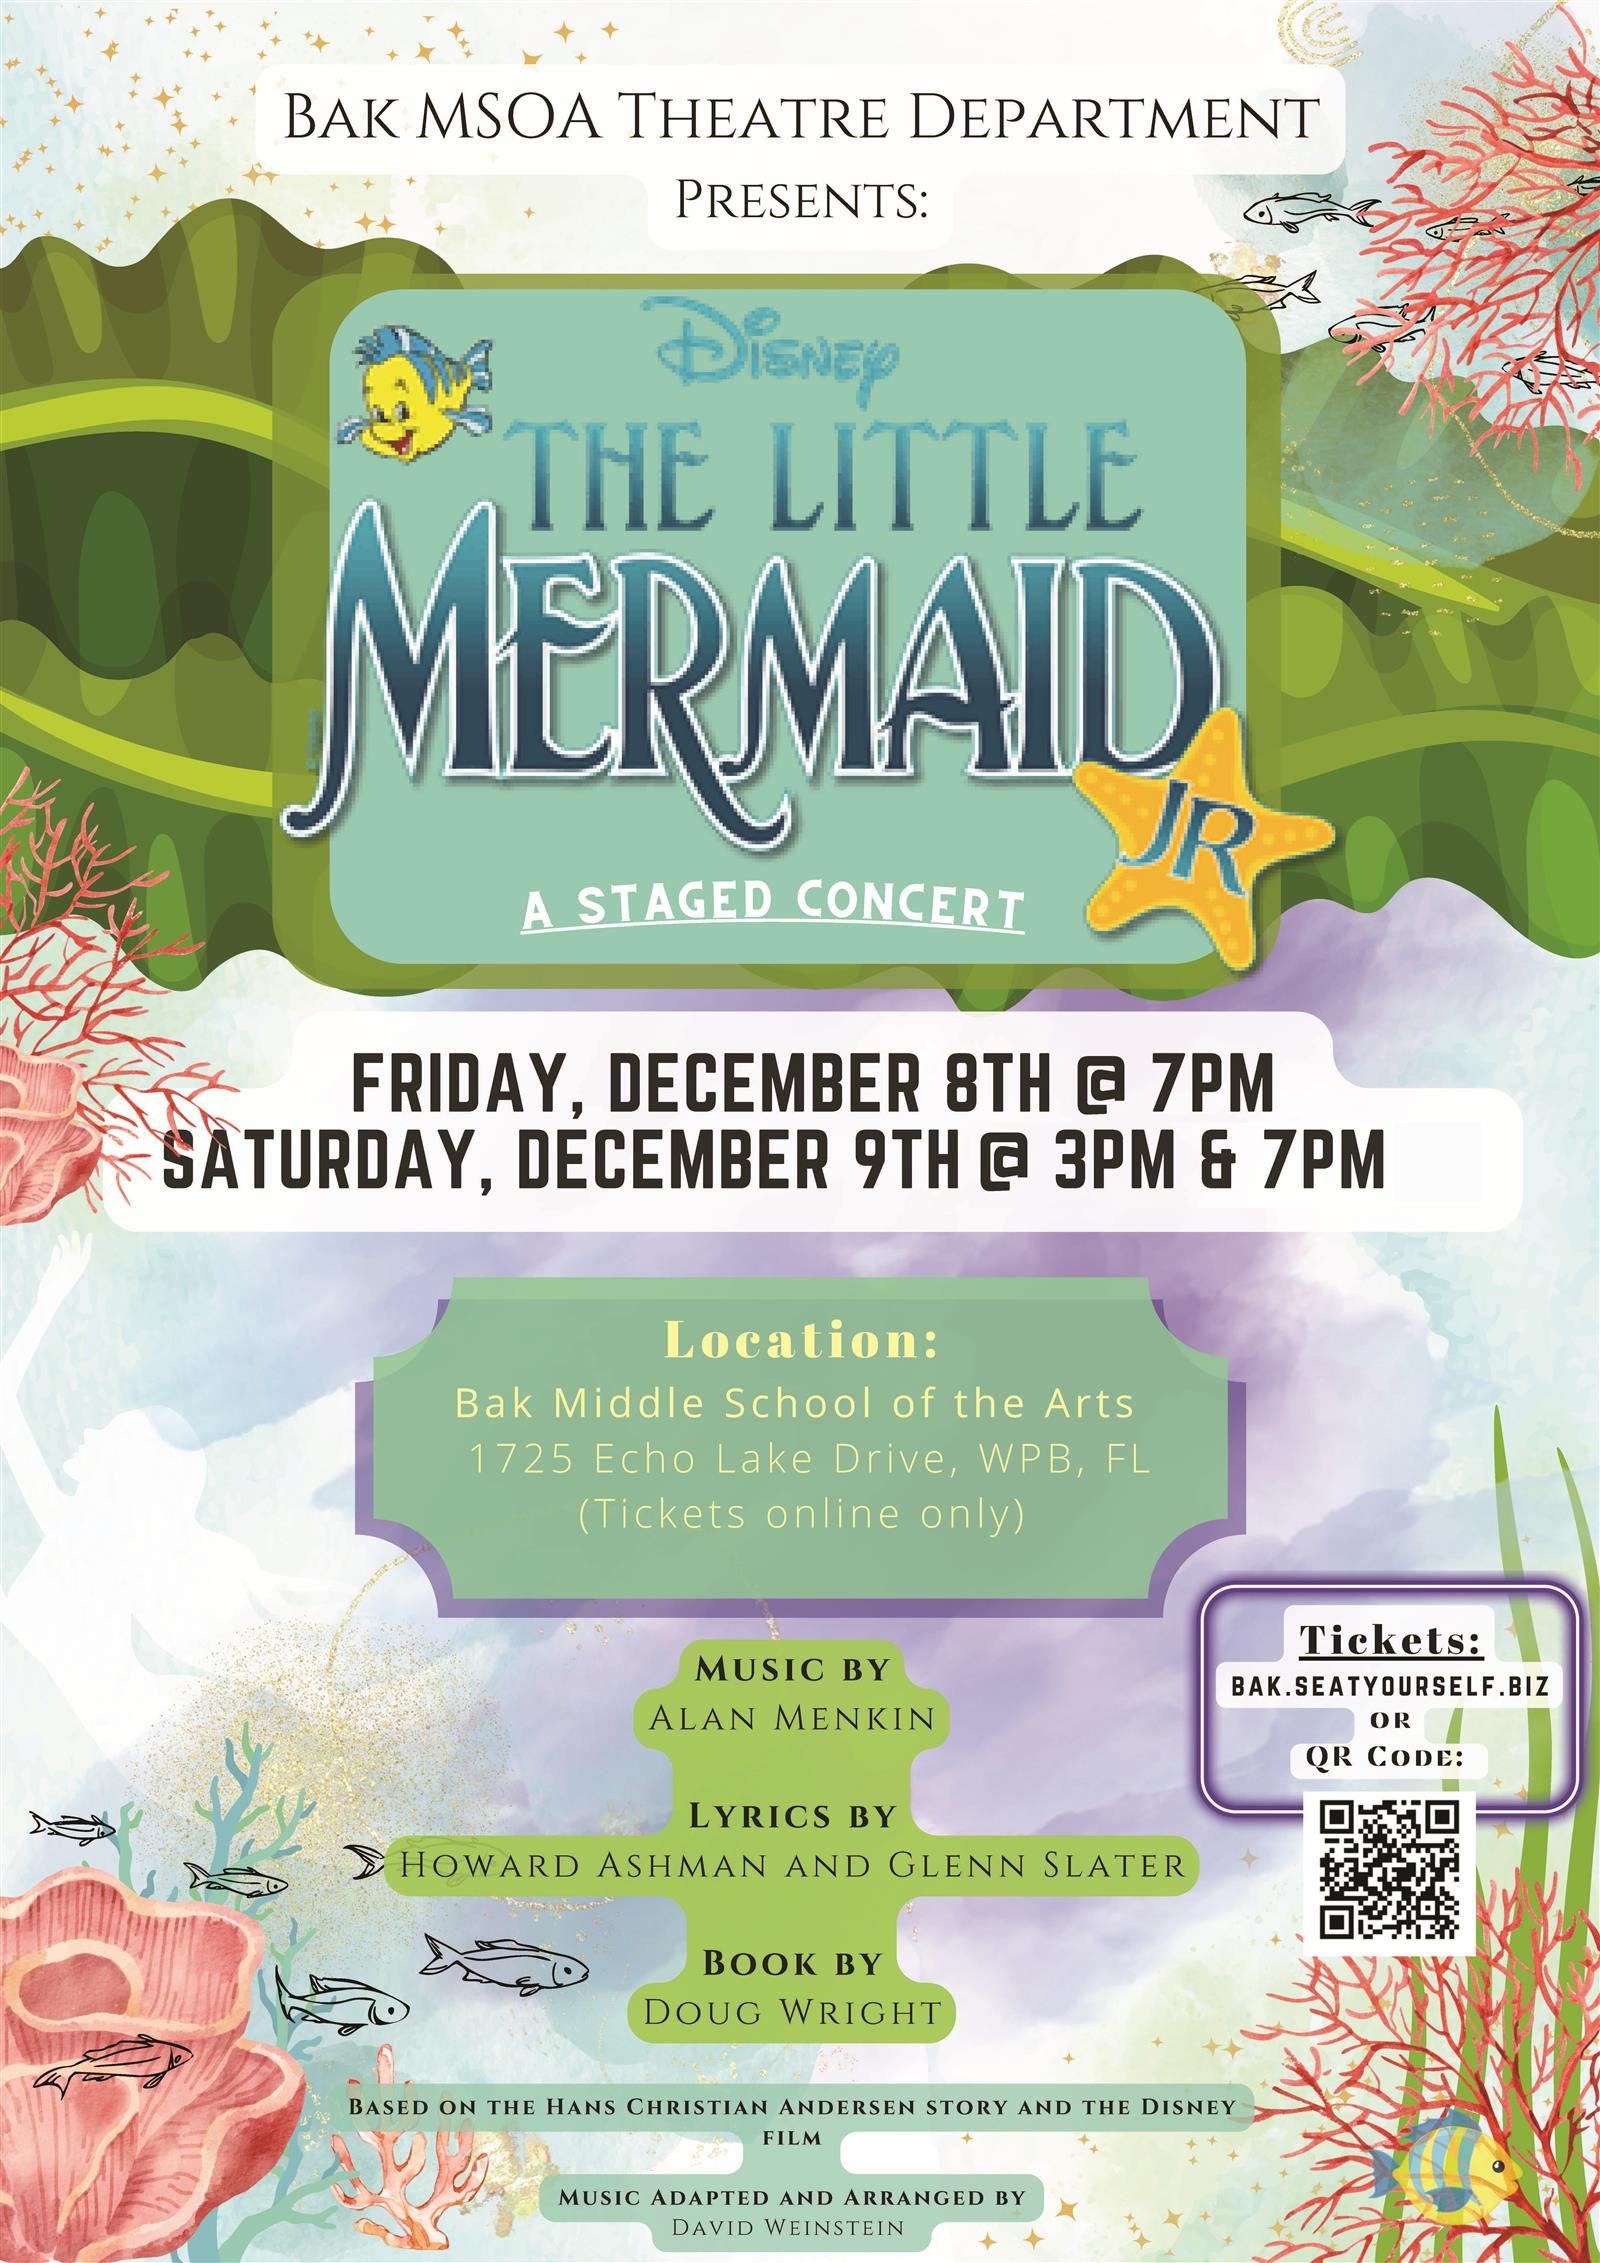 Disney The Little Mermaid, Jr. A staged concert - Friday, December 8th at 7pm and Saturday, December 9th at 3pm and 7pm